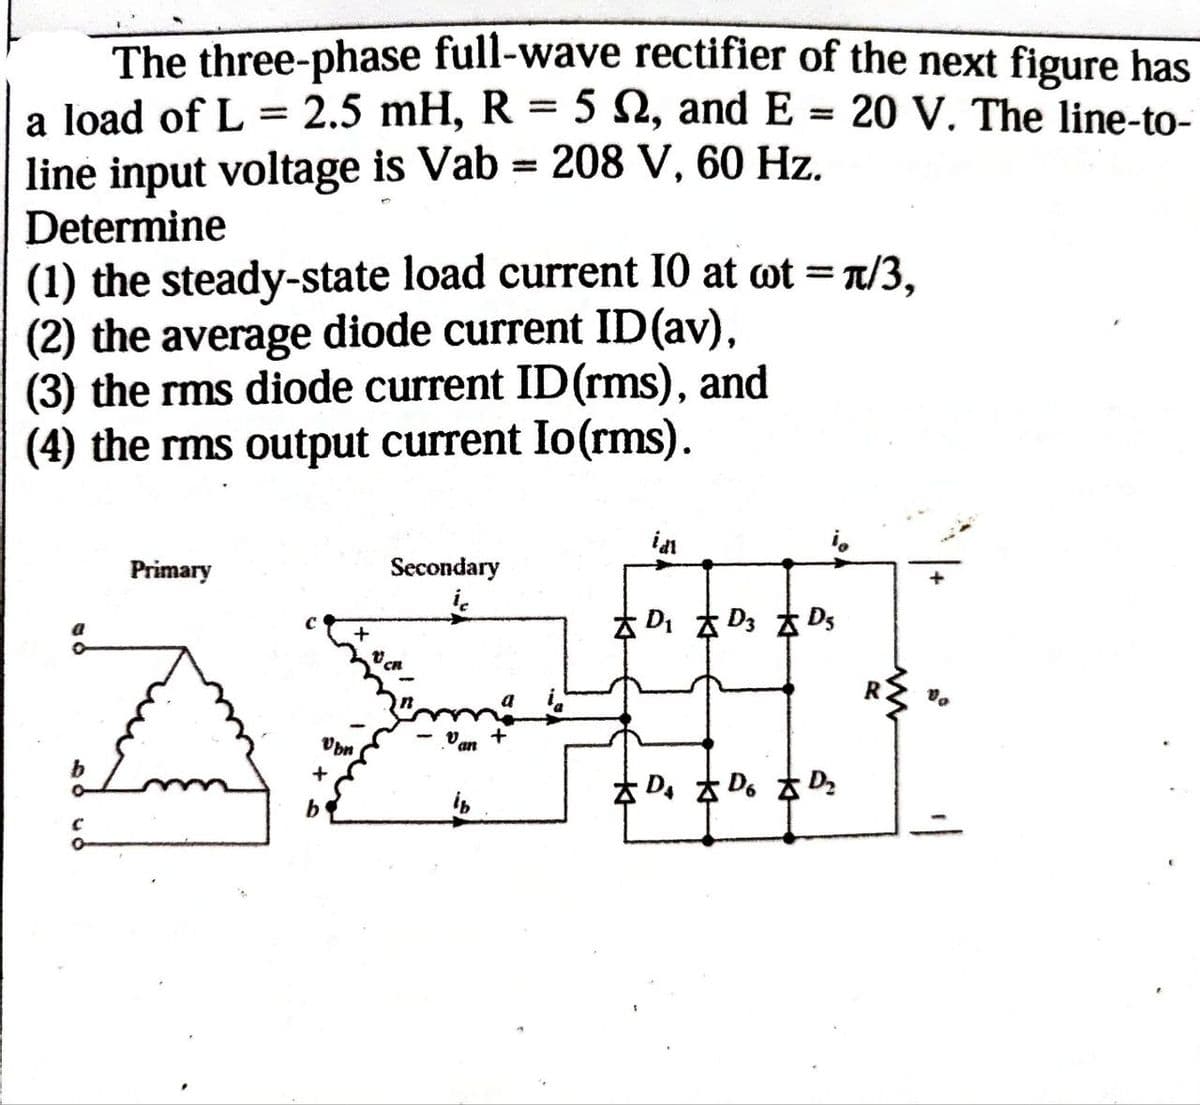 The three-phase full-wave rectifier of the next figure has
a load of L = 2.5 mH, R = 5 2, and E = 20 V. The line-to-
line input voltage is Vab = 208 V, 60 Hz.
Determine
(1) the steady-state load current 10 at wt = π/3,
(2) the average diode current ID (av),
(3) the rms diode current ID (rms), and
(4) the rms output current Io(rms).
Primary
D₁ D3 D
id
Secondary
+
D₁ Do
ib
b
Ubn
++
w
R
D₂